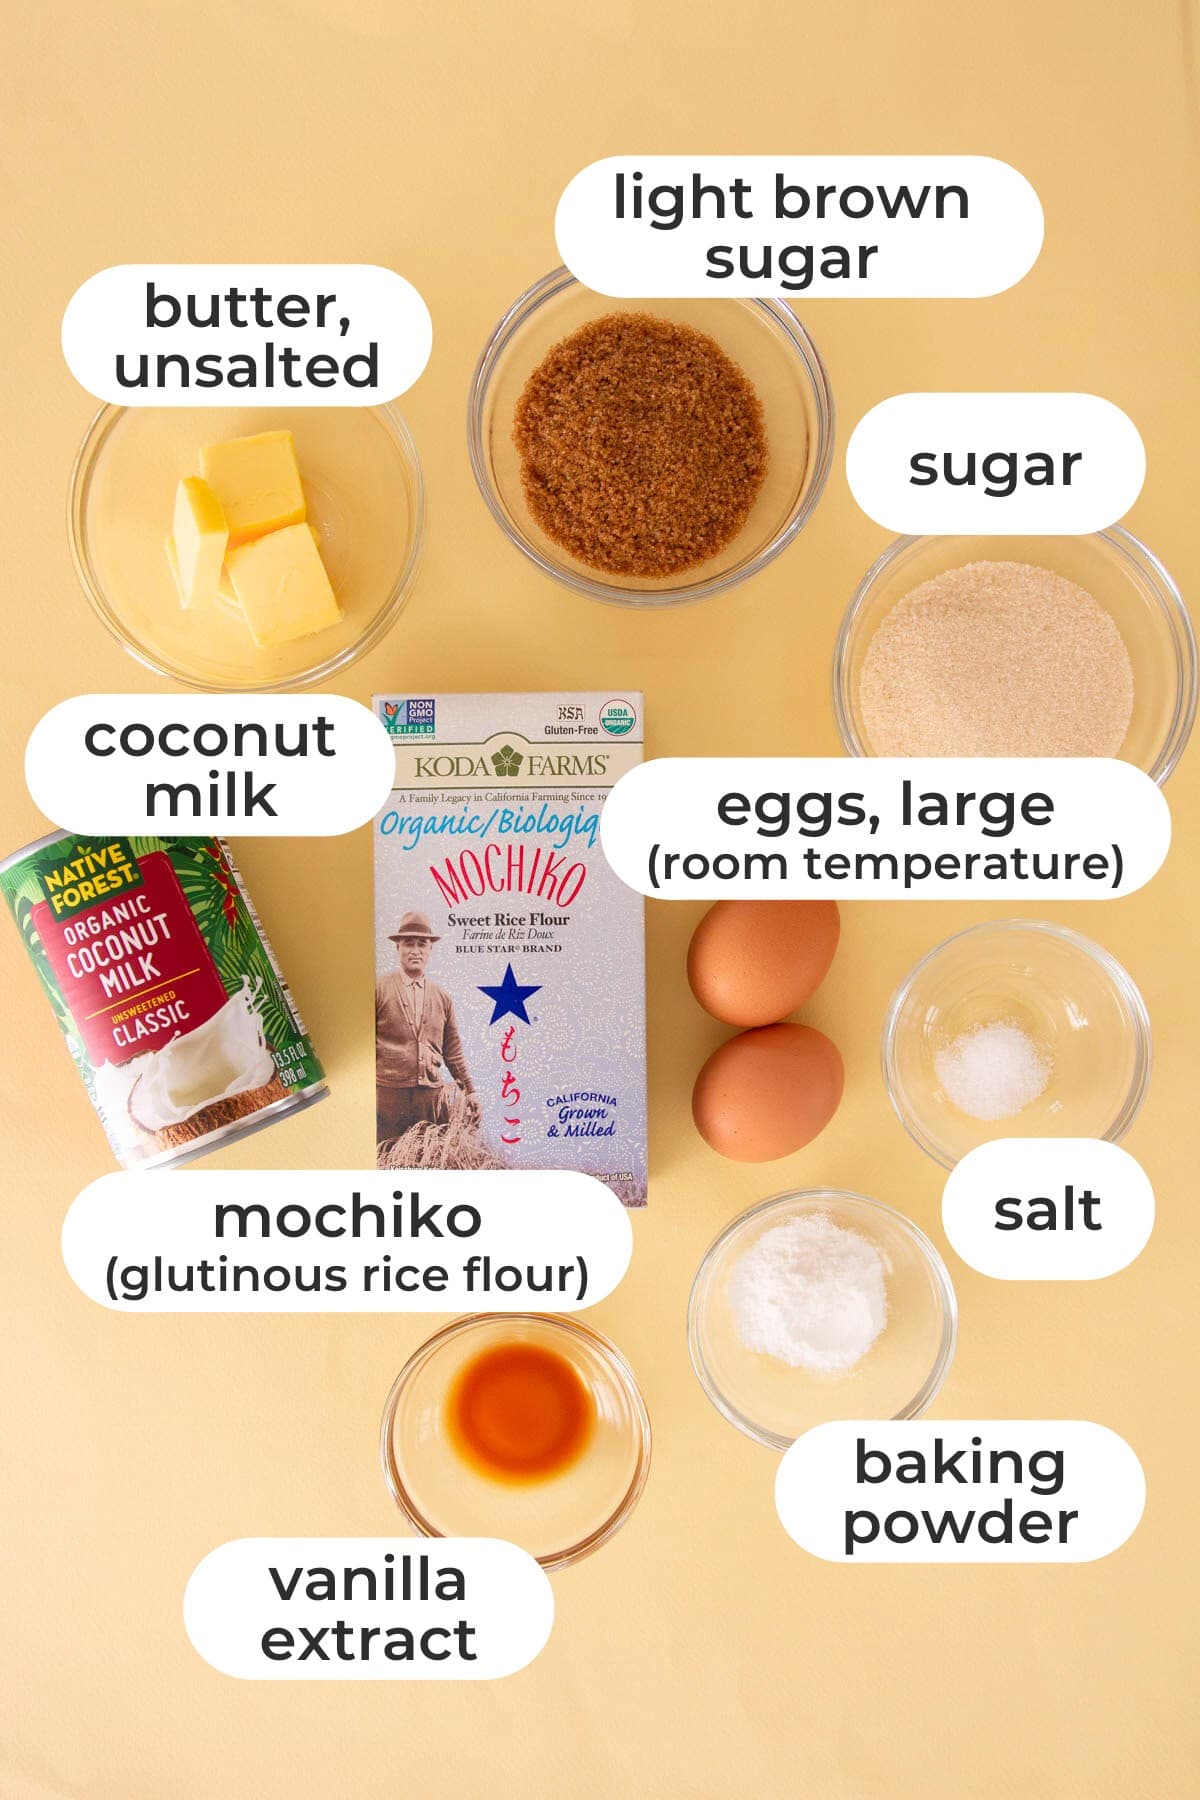 Labeled ingredients for mochi muffins over a yellow background, including unsalted butter, light brown sugar, sugar, coconut milk, eggs (room temperature), mochiko (glutinous rice flour), salt, vanilla extract, and baking powder.